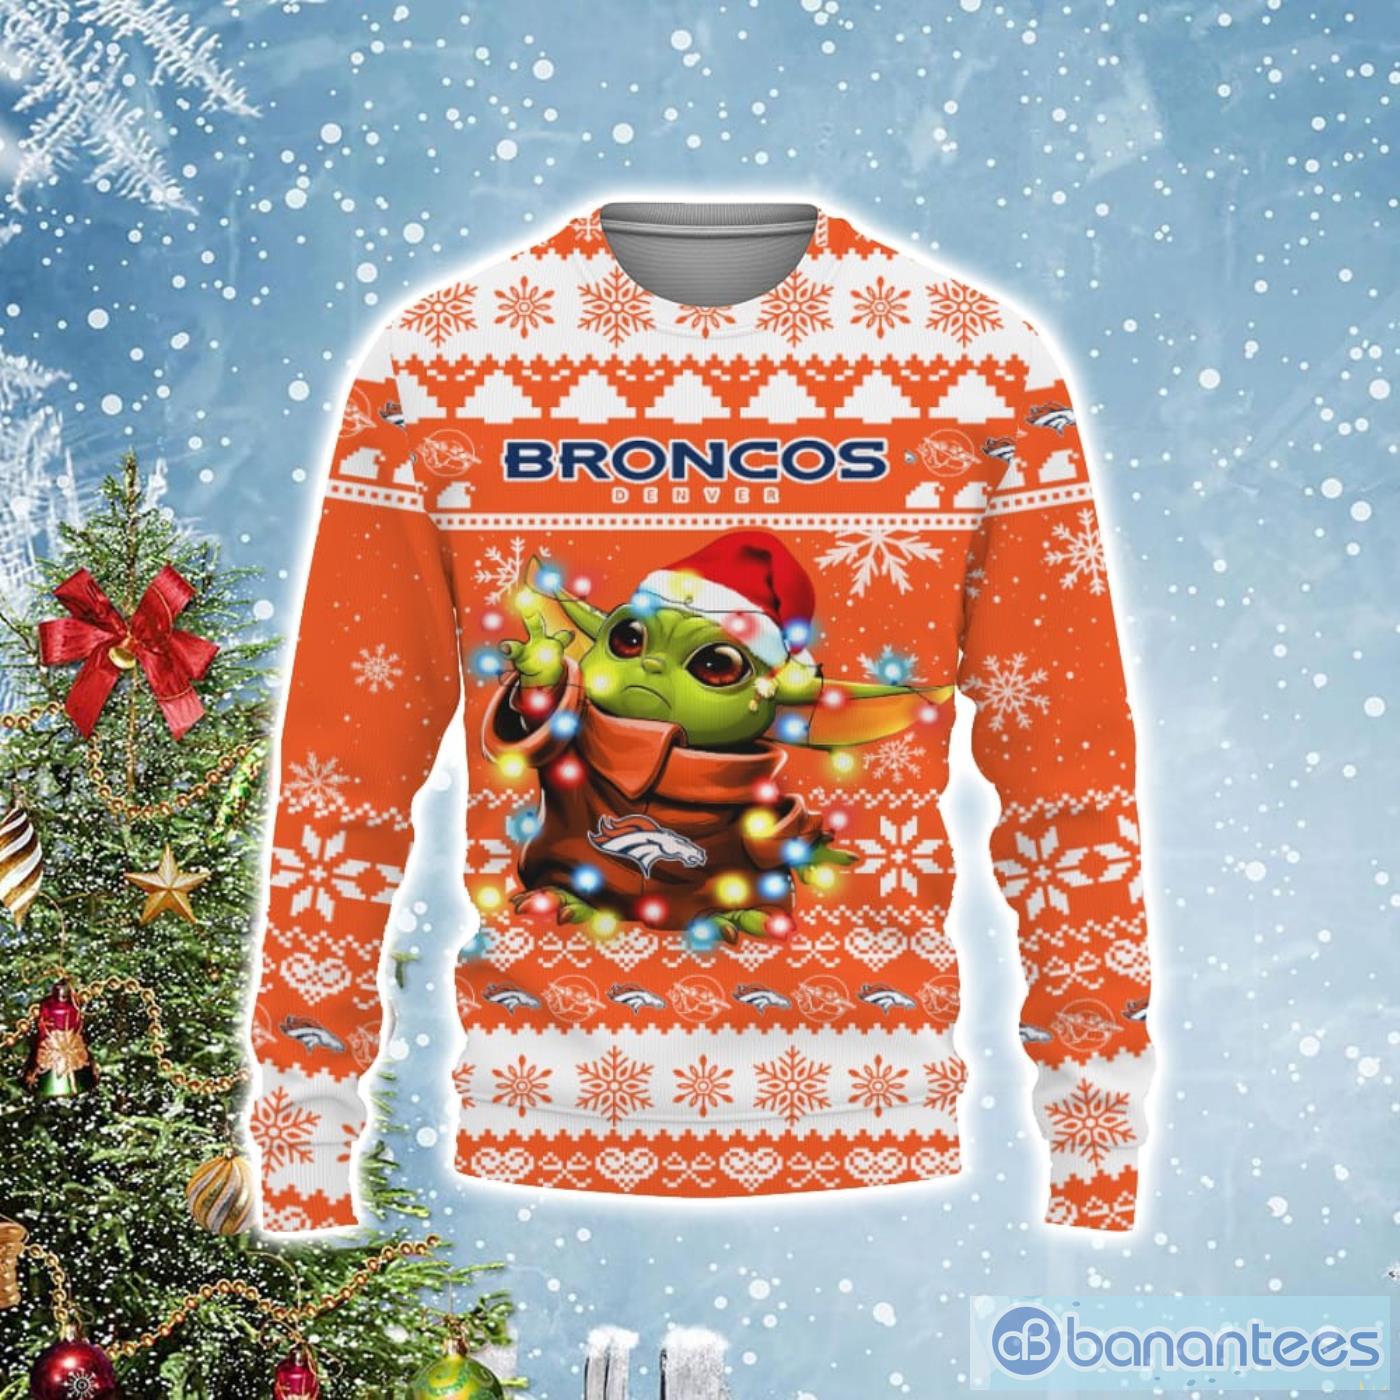 Denver Broncos Baby Yoda Star Wars Ugly Christmas Sweater Product Photo 1